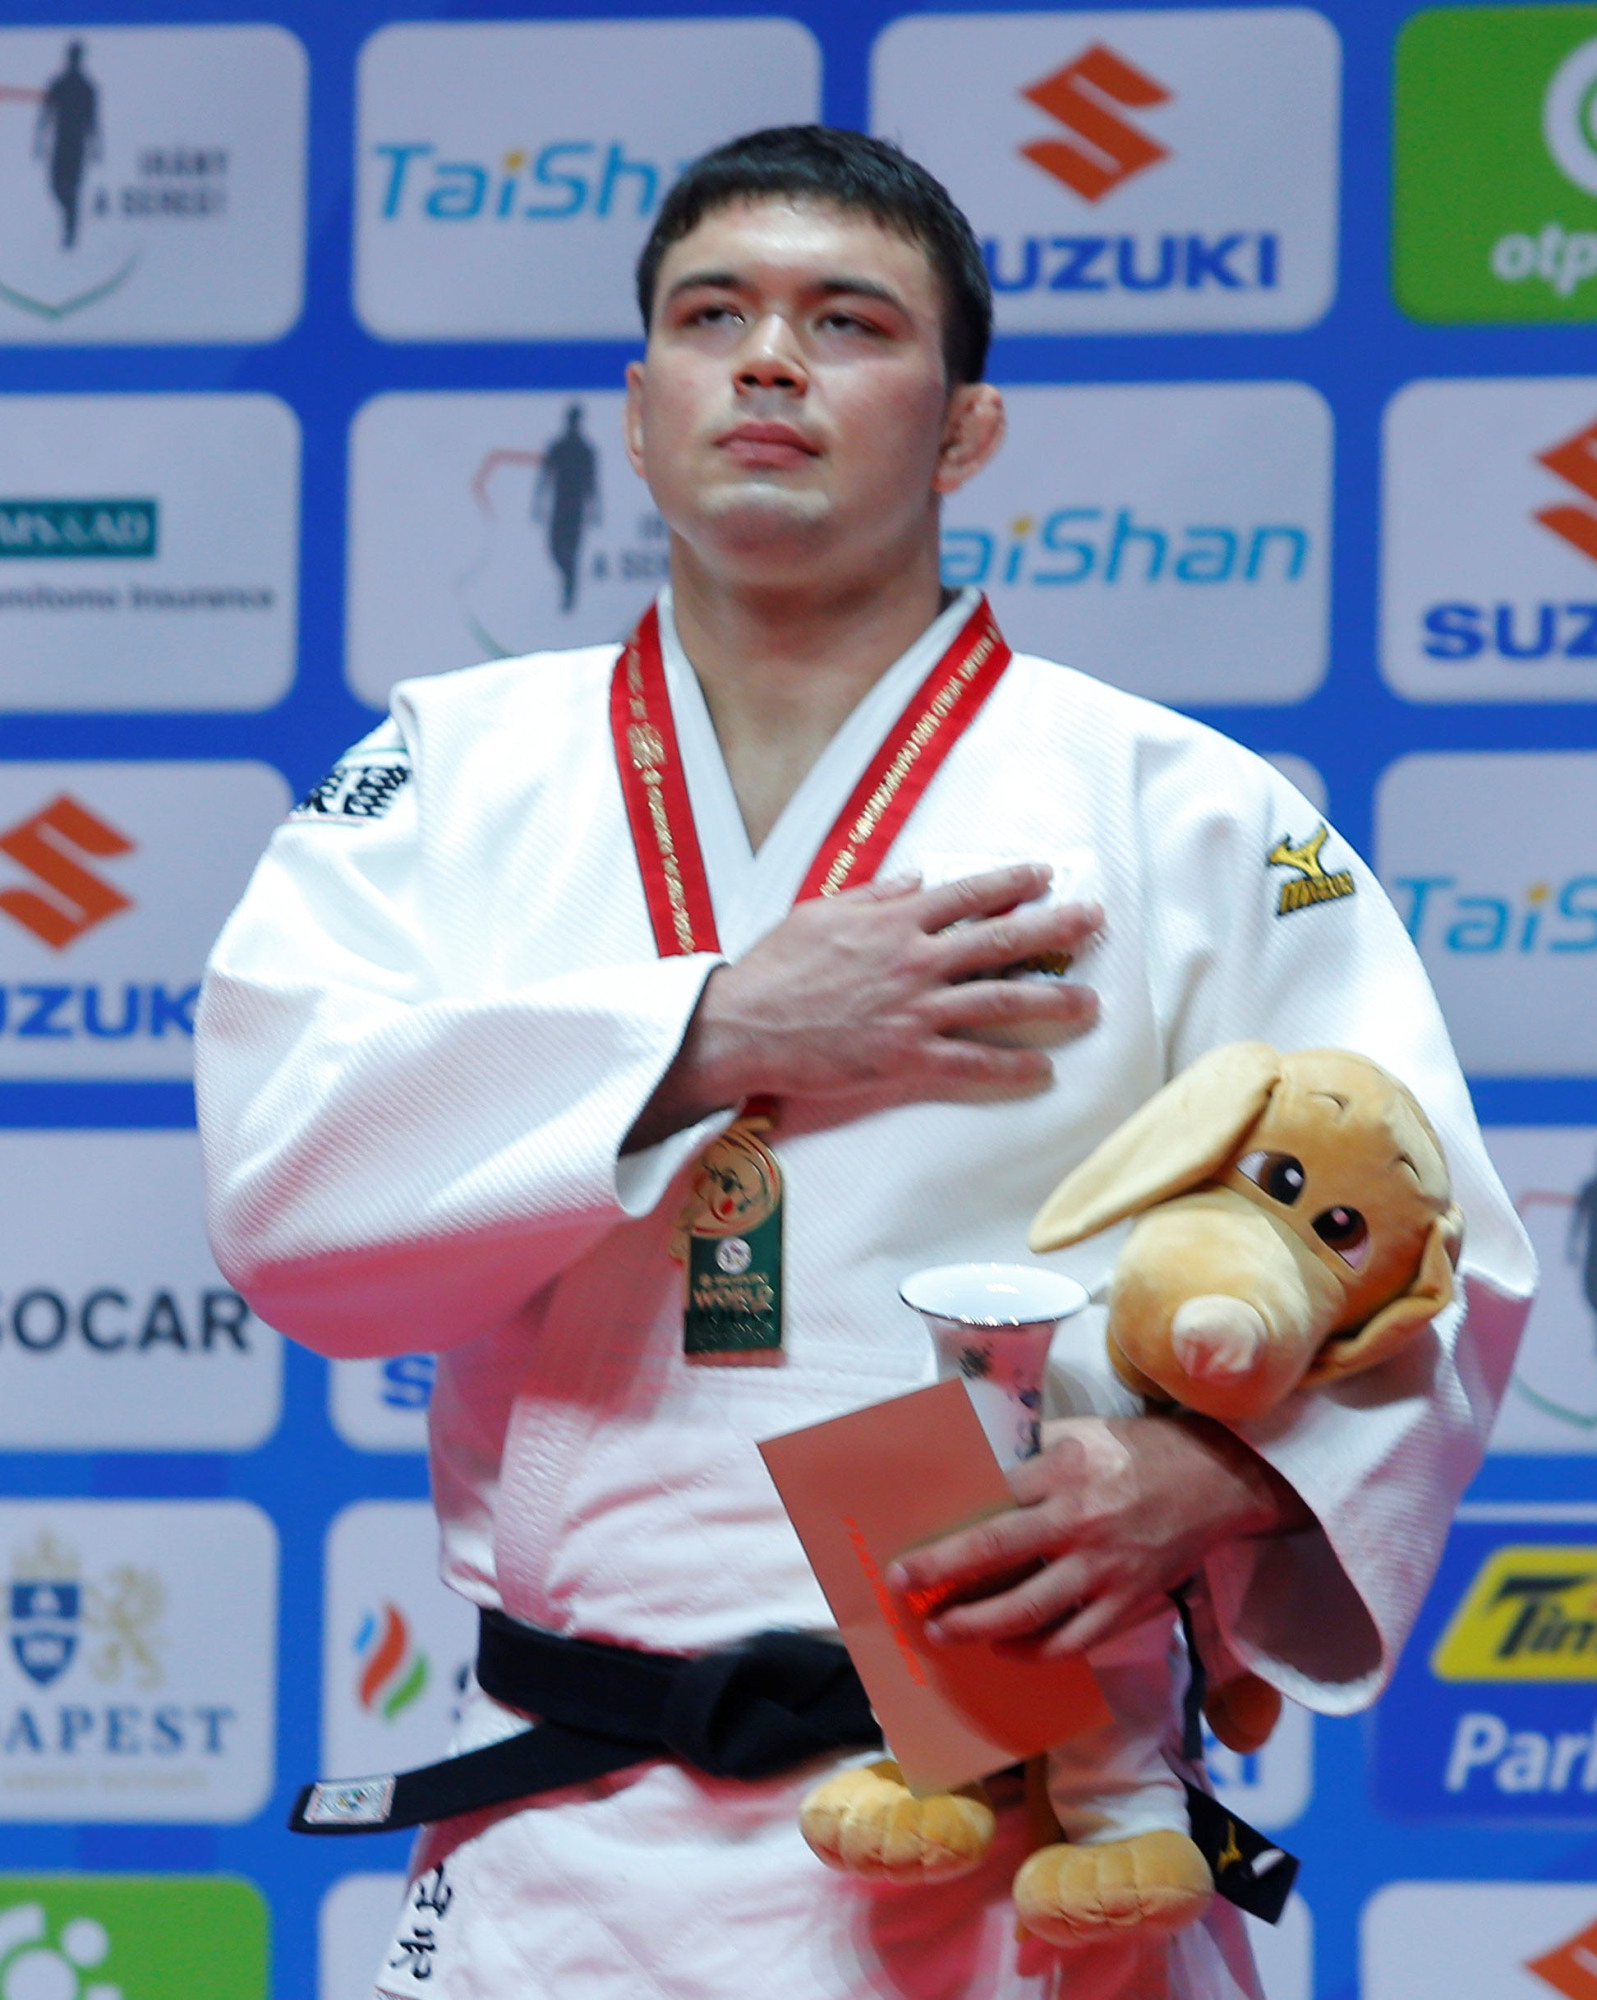 Wolf Represents Japan In Judo